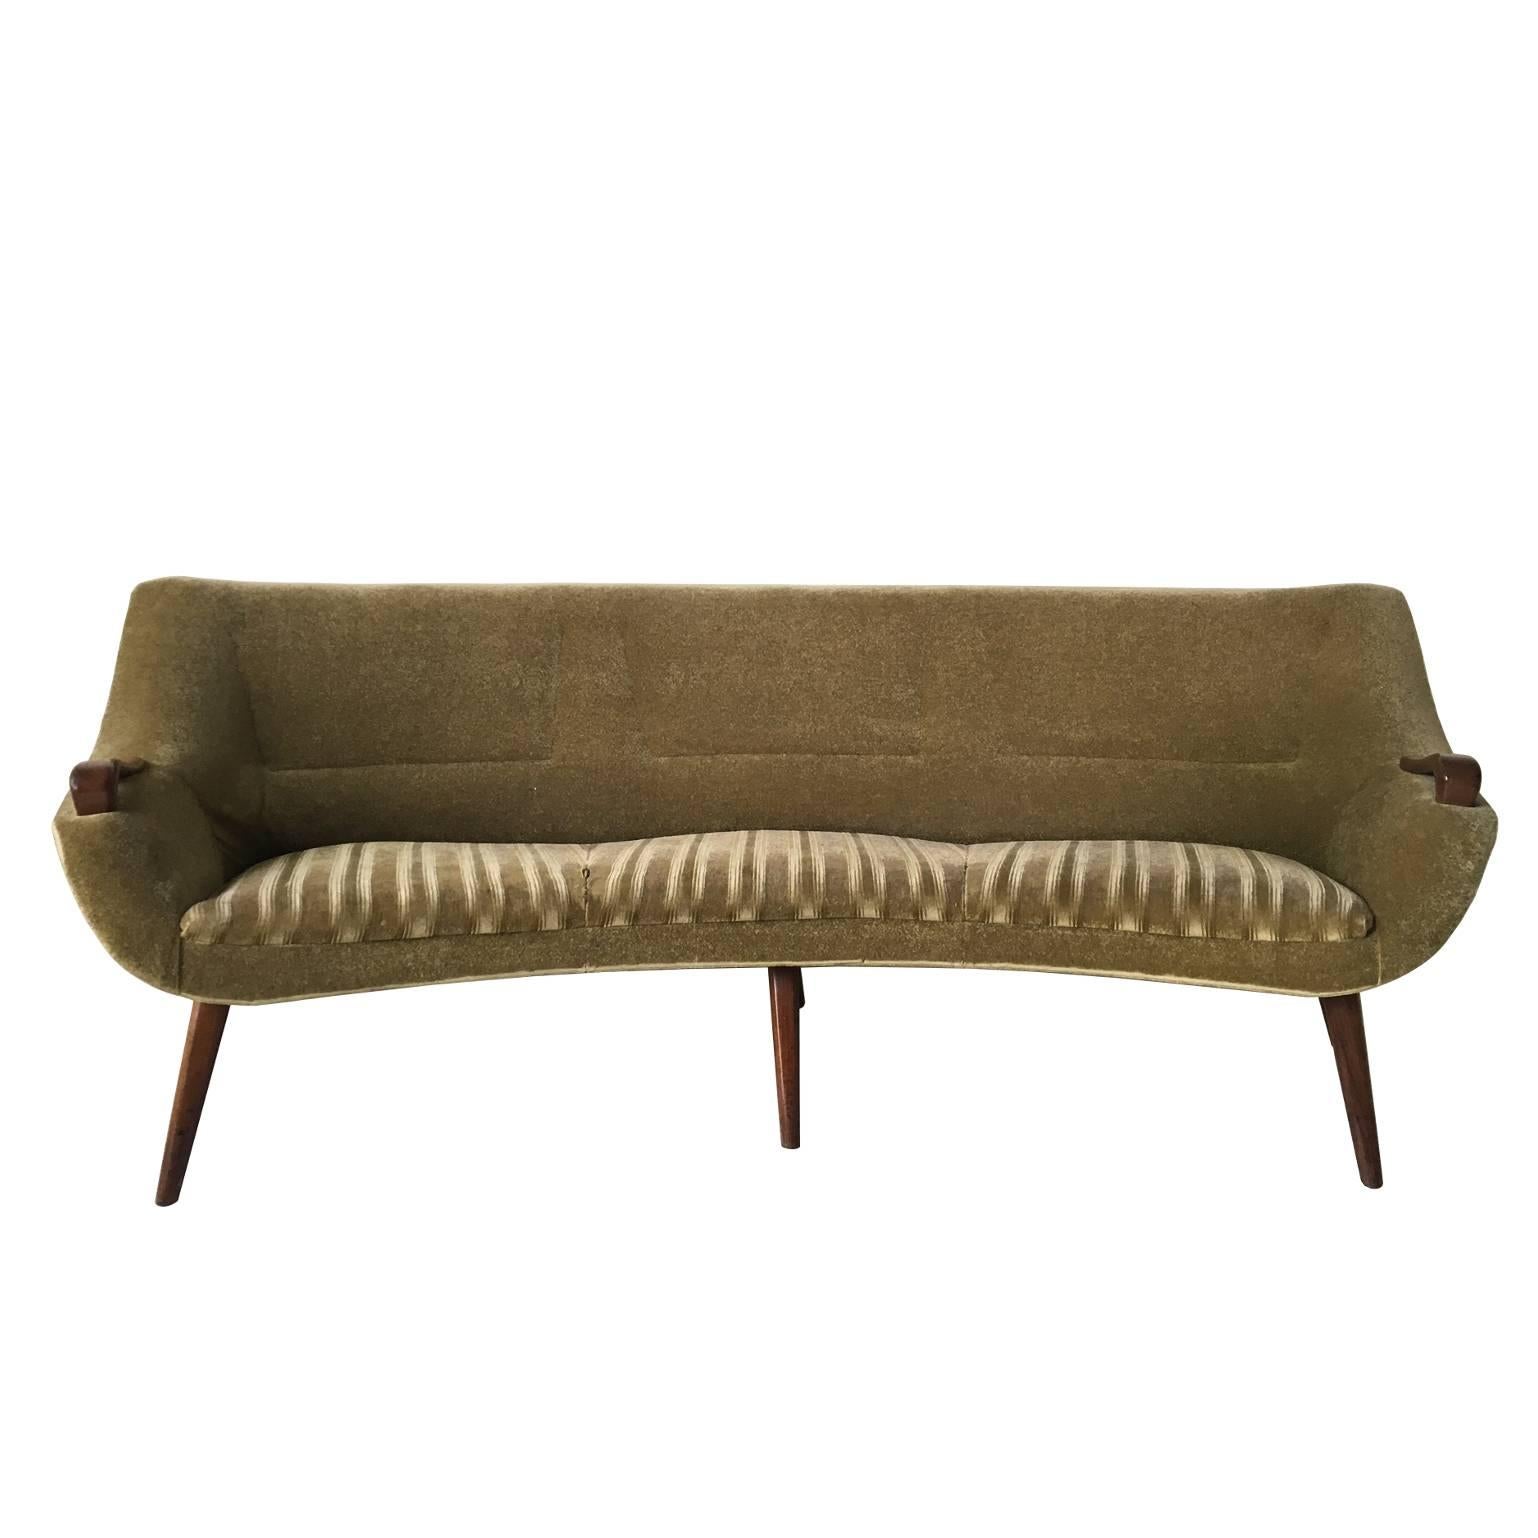 Ico Parisi Style Sofa Set with Teak Details and Green Fabric. LAST CHANCE SALE